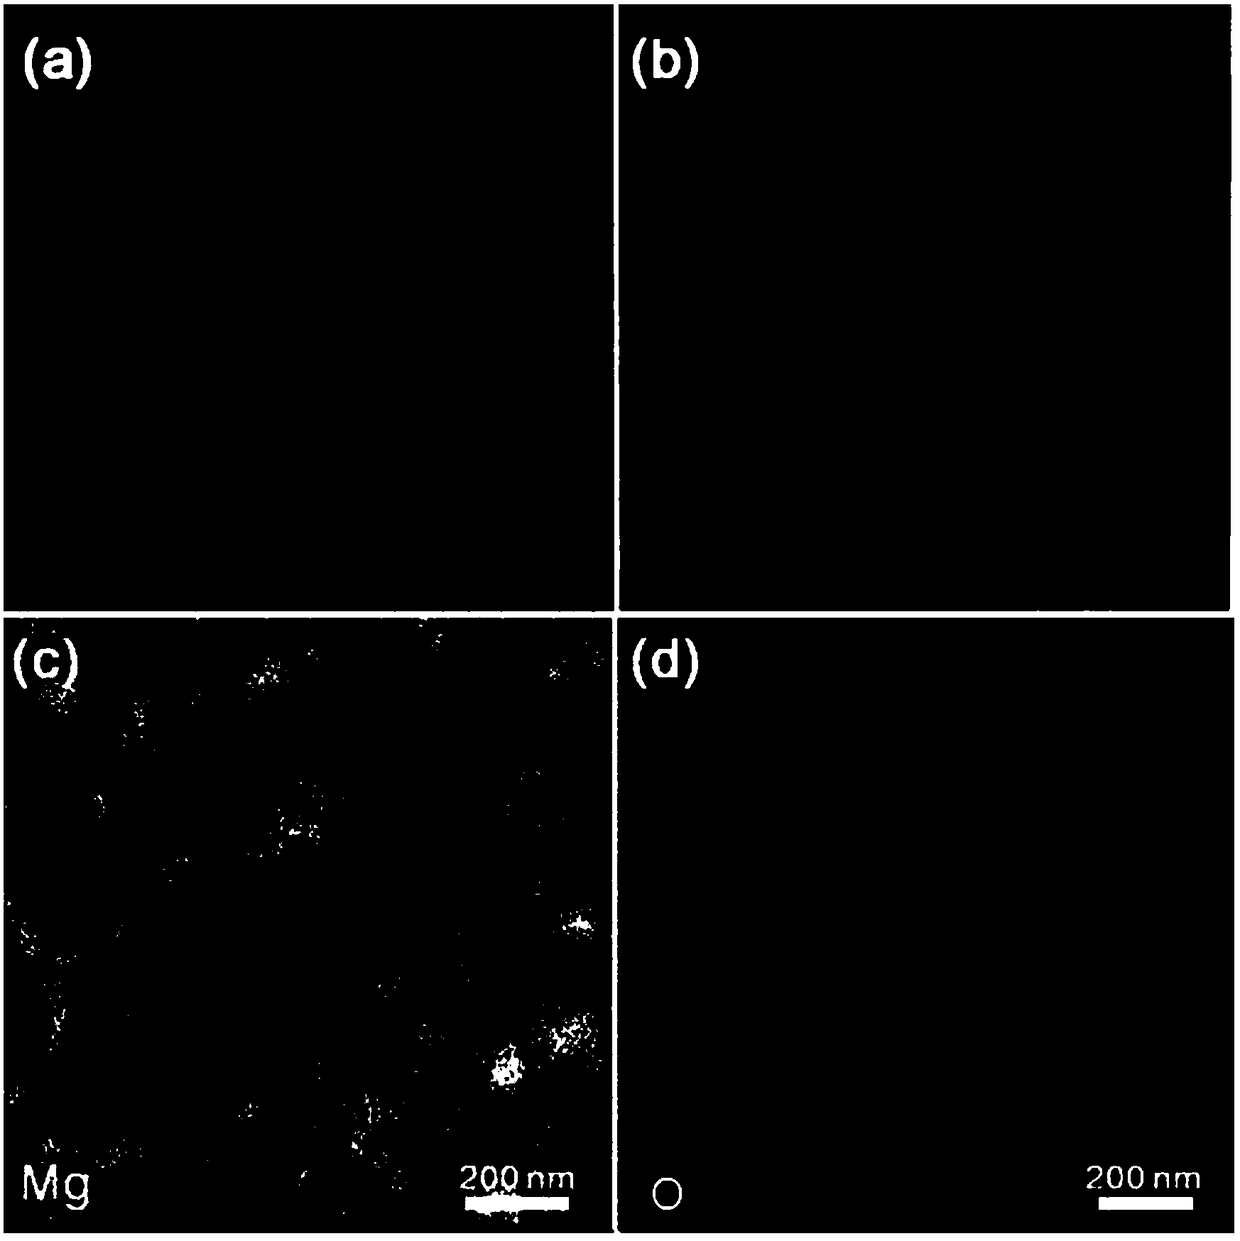 Preparation method for in-situ generation of MgO dispersion strengthened ultra-fine grain Al-Mg alloy